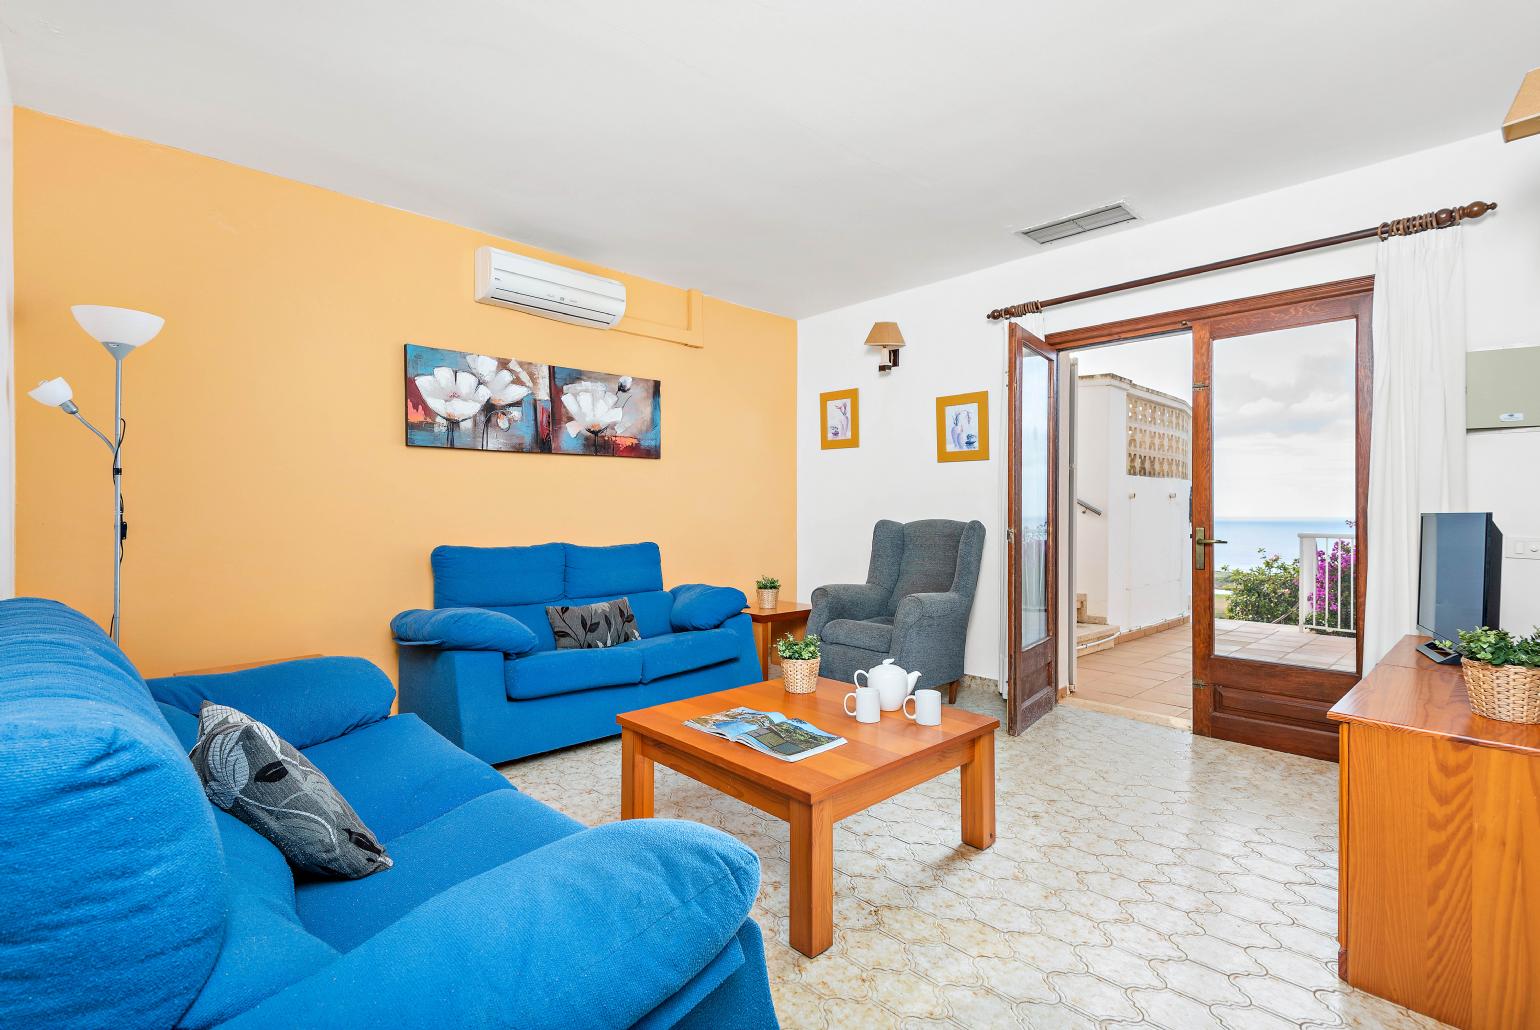 ,Living room area with A/C, and terrace access with a panoramic sea viewsea view